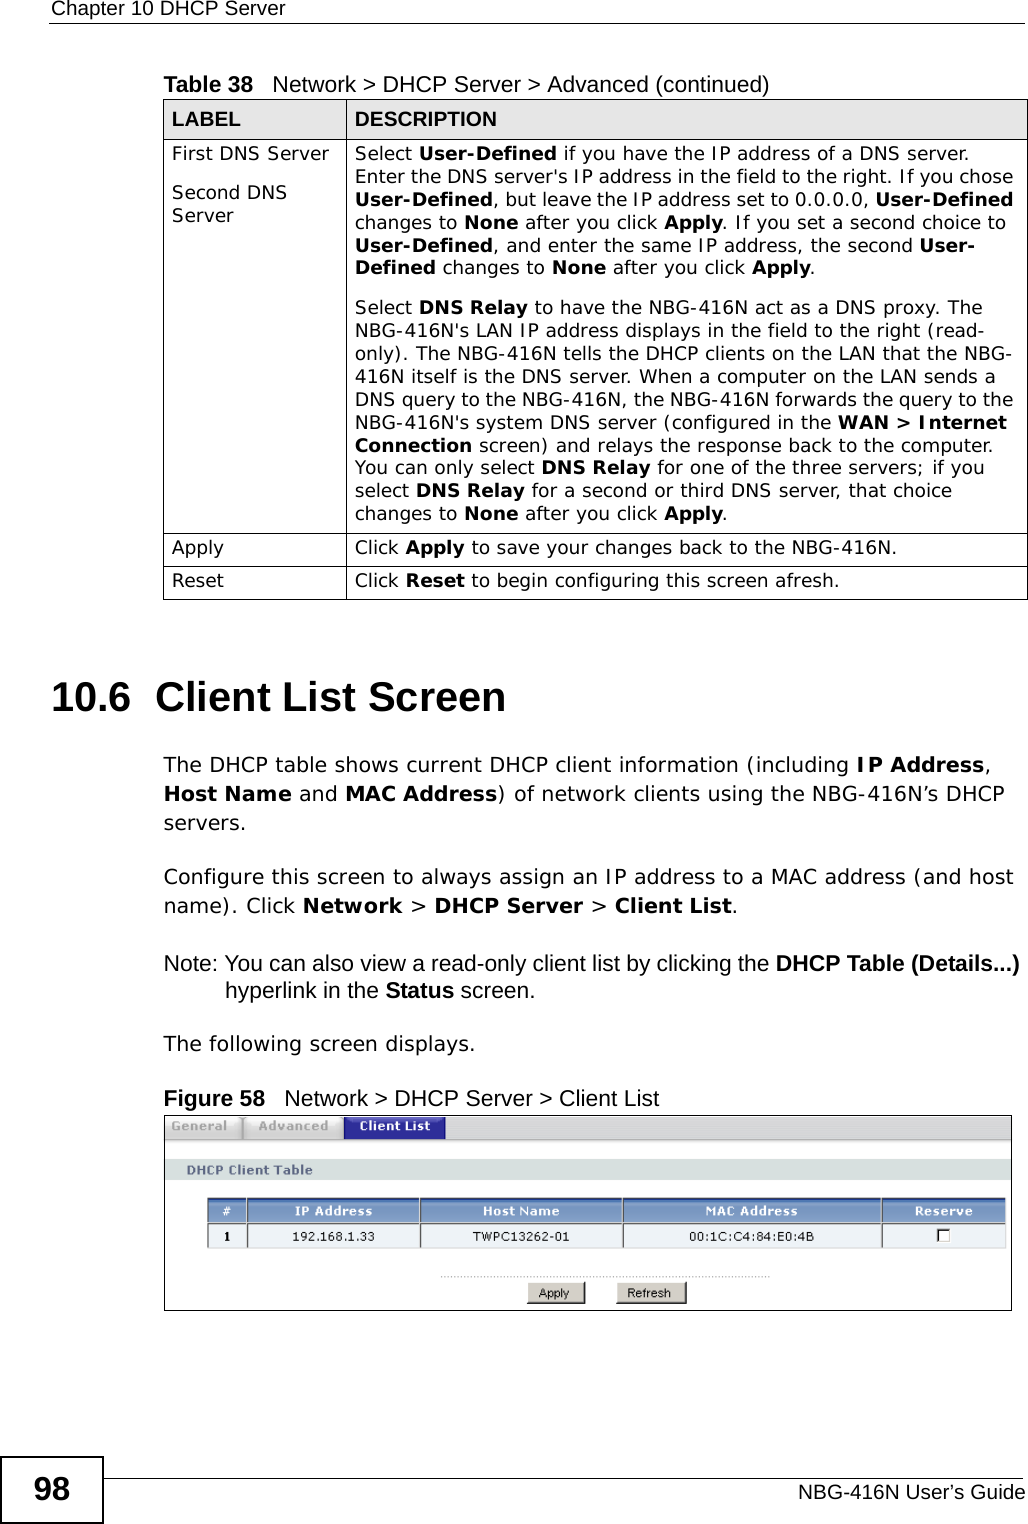 Chapter 10 DHCP ServerNBG-416N User’s Guide9810.6  Client List ScreenThe DHCP table shows current DHCP client information (including IP Address, Host Name and MAC Address) of network clients using the NBG-416N’s DHCP servers.Configure this screen to always assign an IP address to a MAC address (and host name). Click Network &gt; DHCP Server &gt; Client List. Note: You can also view a read-only client list by clicking the DHCP Table (Details...) hyperlink in the Status screen. The following screen displays.Figure 58   Network &gt; DHCP Server &gt; Client List First DNS ServerSecond DNS Server Select User-Defined if you have the IP address of a DNS server. Enter the DNS server&apos;s IP address in the field to the right. If you chose User-Defined, but leave the IP address set to 0.0.0.0, User-Defined changes to None after you click Apply. If you set a second choice to User-Defined, and enter the same IP address, the second User-Defined changes to None after you click Apply. Select DNS Relay to have the NBG-416N act as a DNS proxy. The NBG-416N&apos;s LAN IP address displays in the field to the right (read-only). The NBG-416N tells the DHCP clients on the LAN that the NBG-416N itself is the DNS server. When a computer on the LAN sends a DNS query to the NBG-416N, the NBG-416N forwards the query to the NBG-416N&apos;s system DNS server (configured in the WAN &gt; Internet Connection screen) and relays the response back to the computer. You can only select DNS Relay for one of the three servers; if you select DNS Relay for a second or third DNS server, that choice changes to None after you click Apply. Apply Click Apply to save your changes back to the NBG-416N.Reset Click Reset to begin configuring this screen afresh.Table 38   Network &gt; DHCP Server &gt; Advanced (continued)LABEL DESCRIPTION